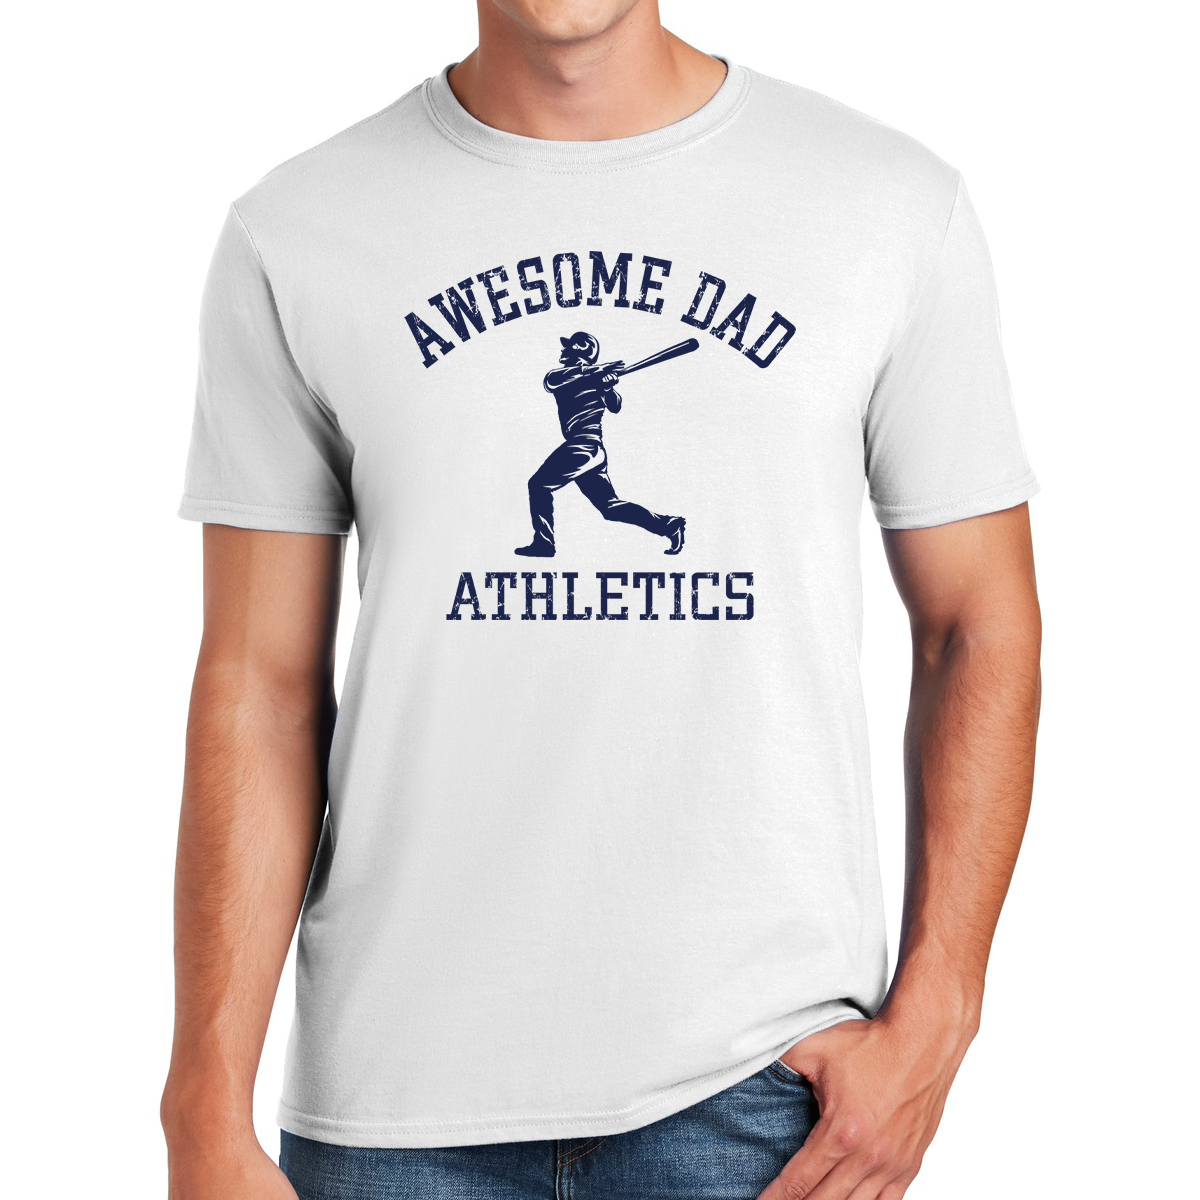 Awesome Dad Athletics Baseball Player Step Up to the Plate in Style Gifts for Dads T-shirt